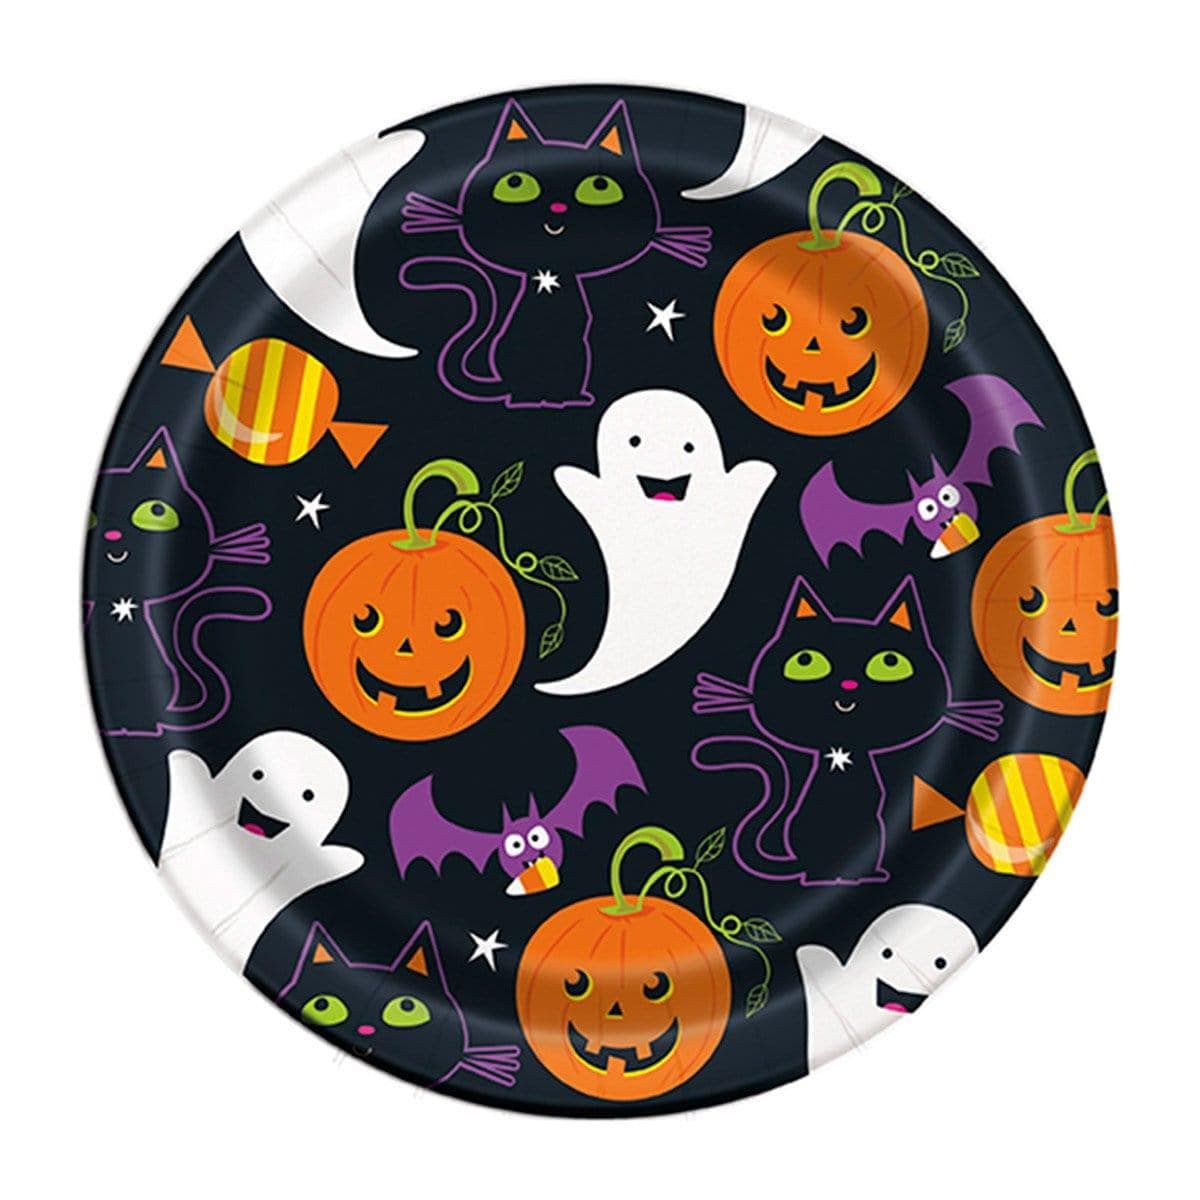 Buy Halloween Cat & Pumpkin Paper Plates 7 Inches, 8 per Package sold at Party Expert